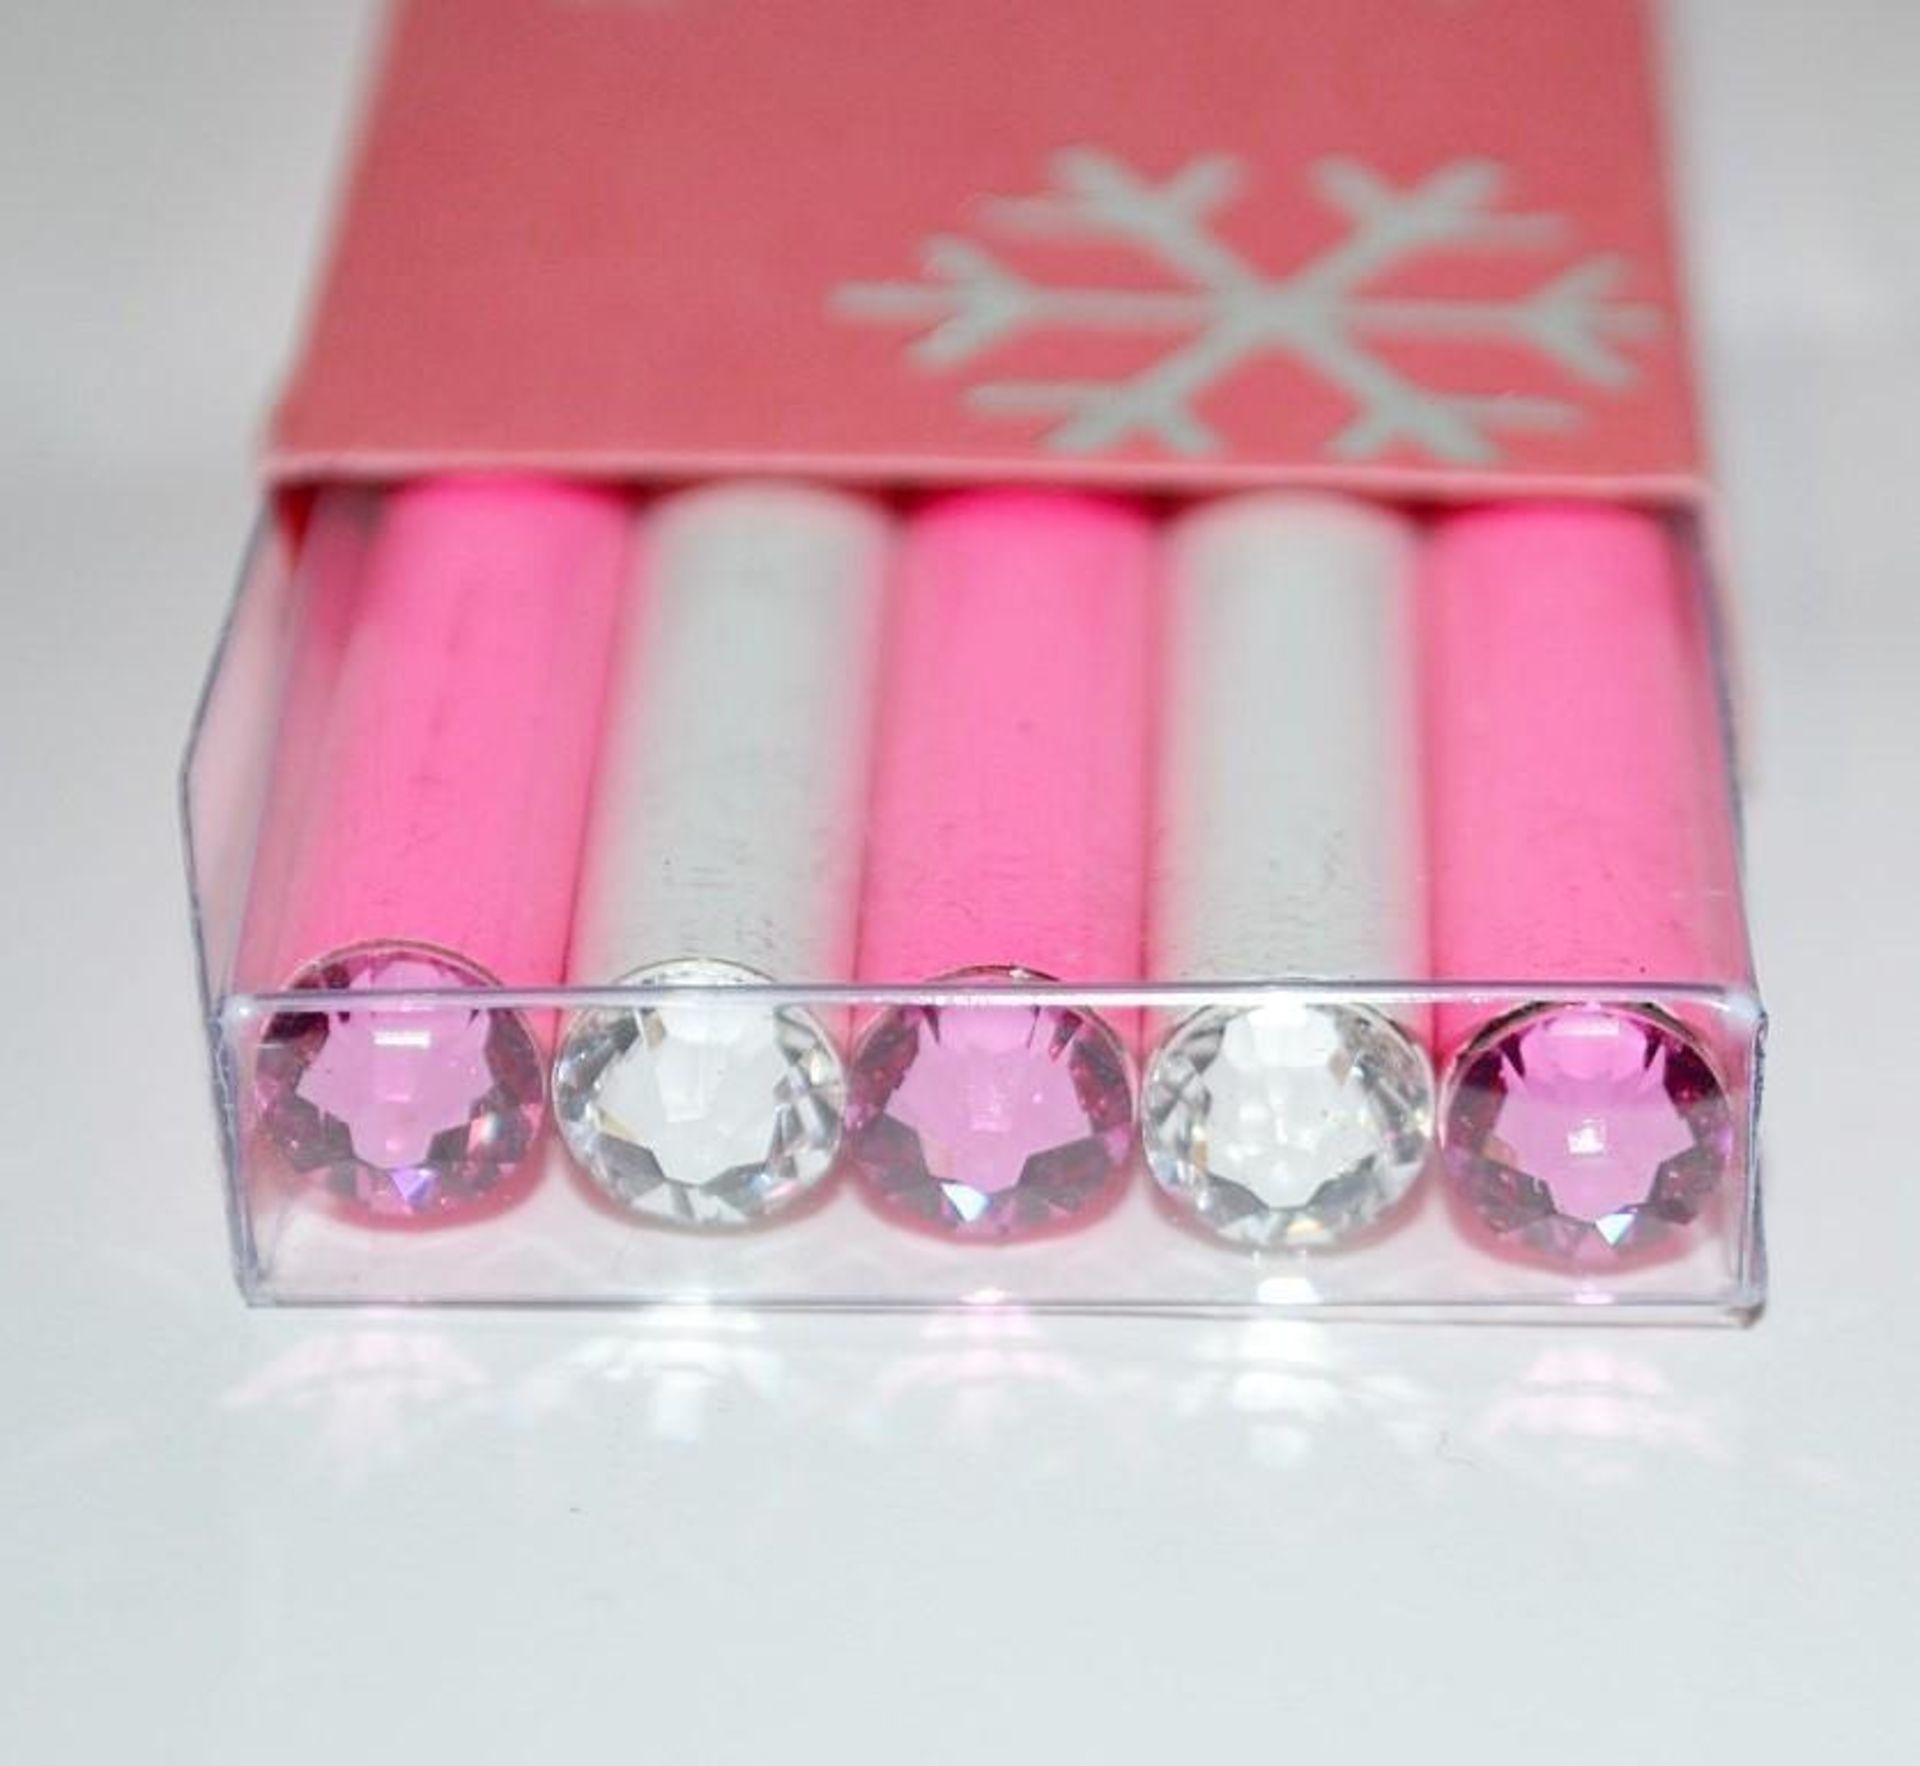 50 x ICE London Christmas Pencil Sets - Colour: PINK - Made With SWAROVSKI® ELEMENTS - Each Set - Image 4 of 4